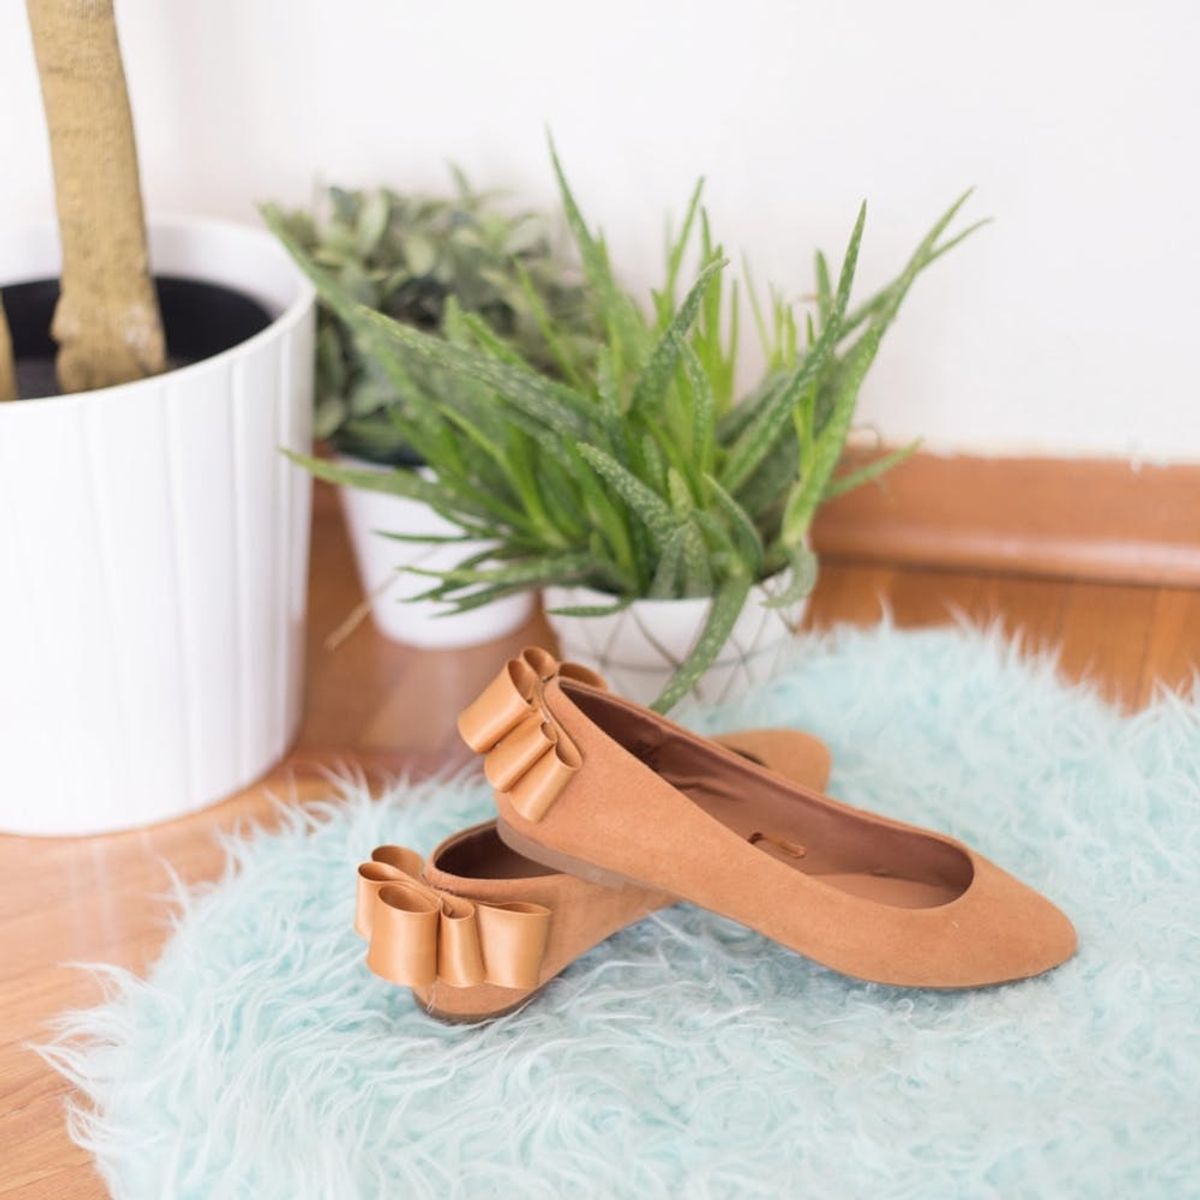 Get Ready for Springtime With These Easy DIY Nude Ballet Shoes